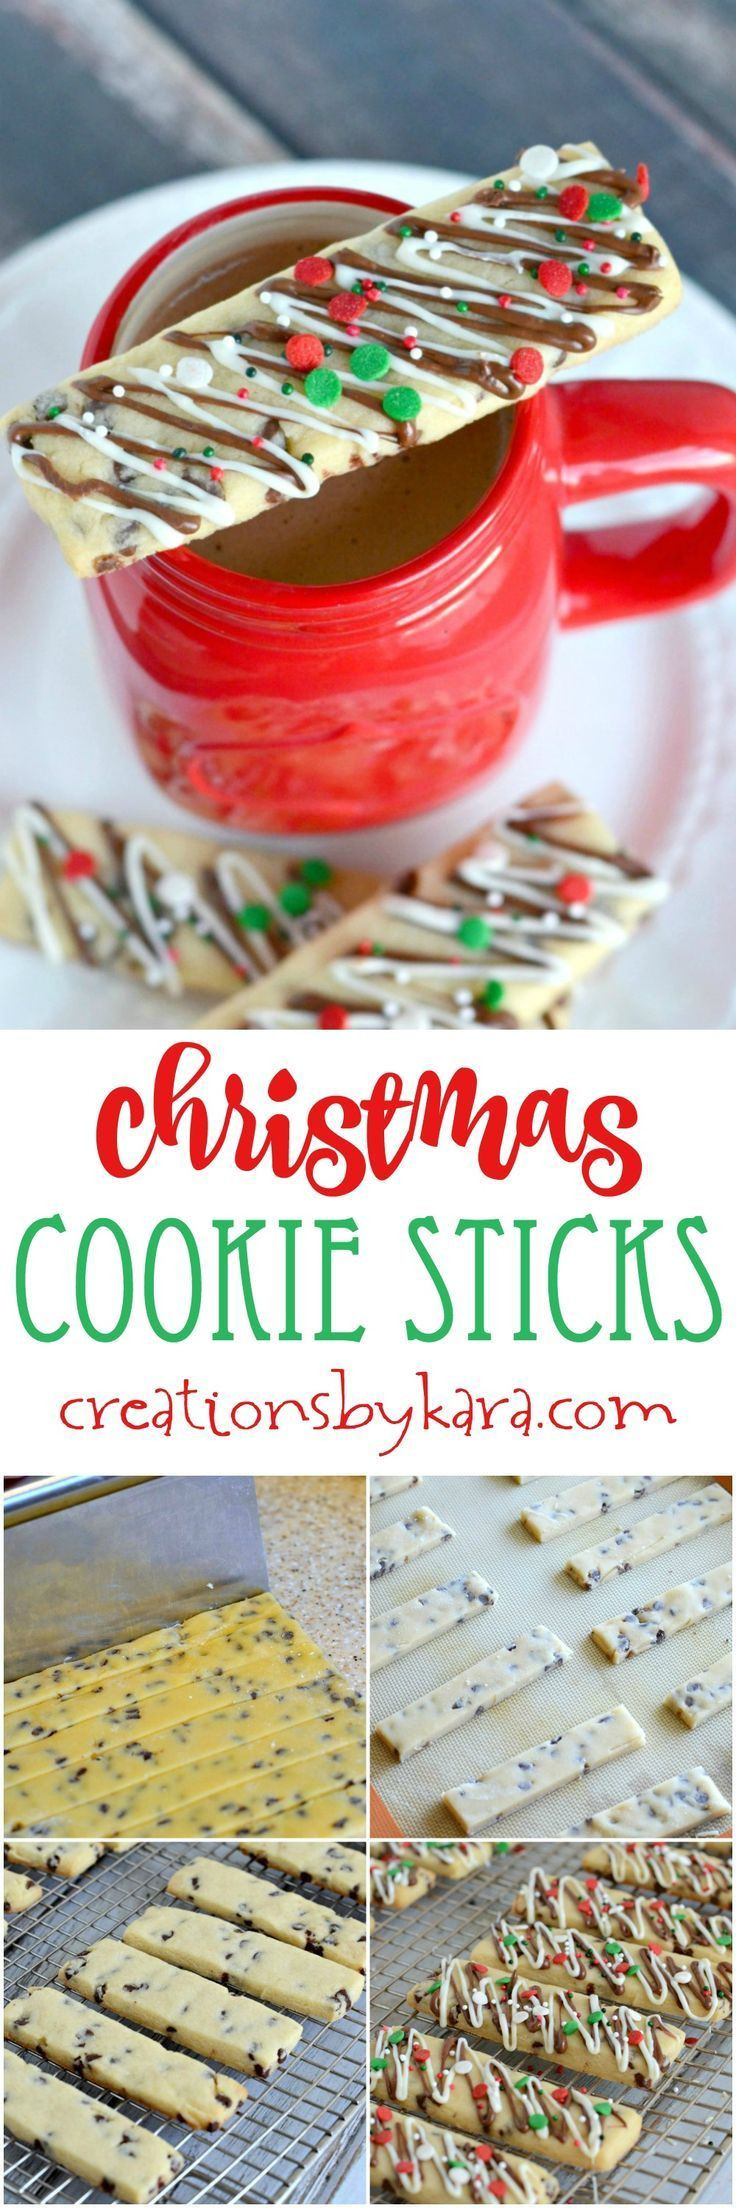 Christmas Cookies Recipe Pinterest
 1000 ideas about Christmas Cookies on Pinterest